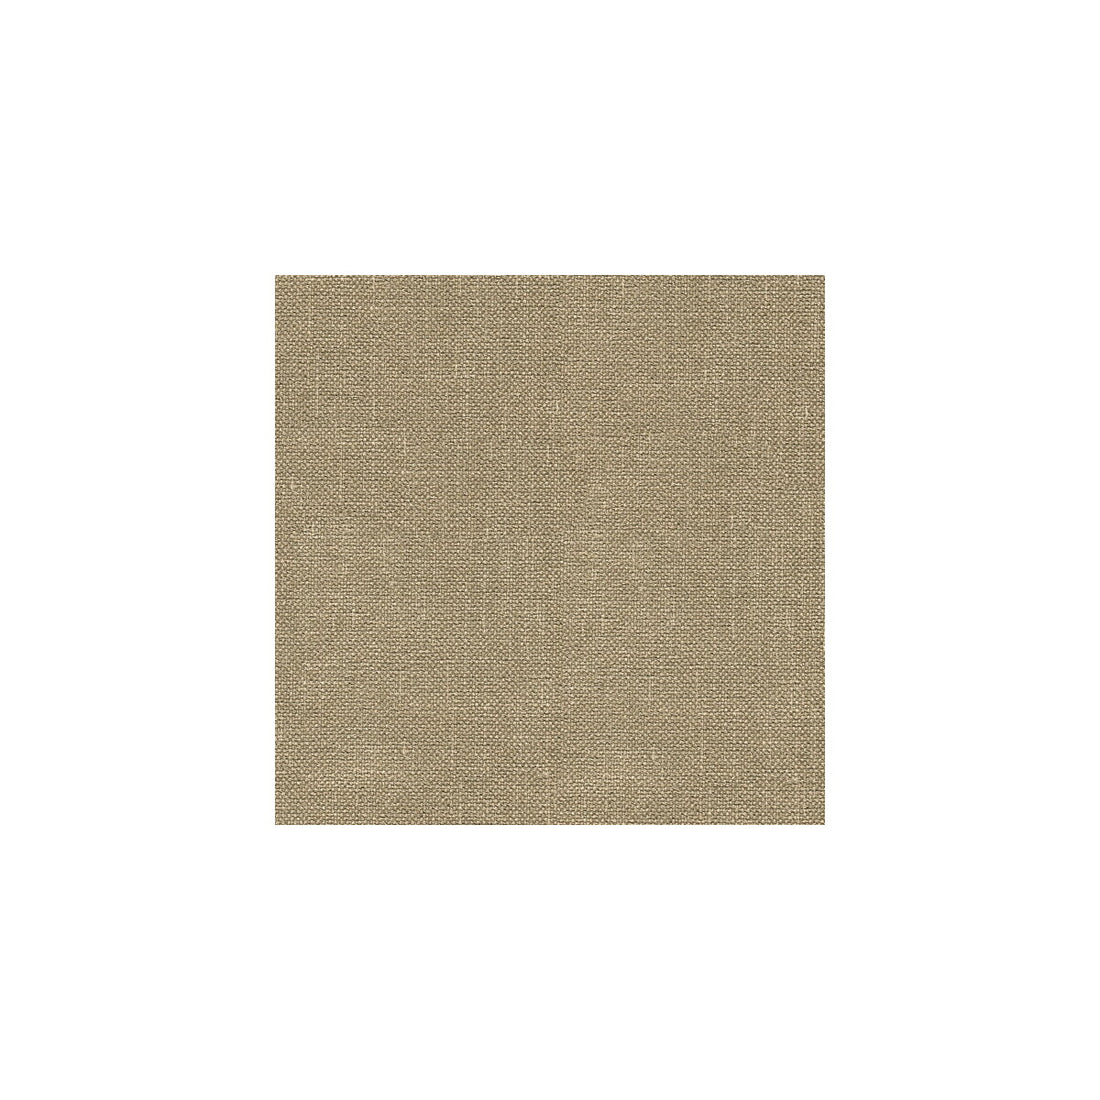 Kravet Basics fabric in 33120-611 color - pattern 33120.611.0 - by Kravet Basics in the Perfect Plains collection